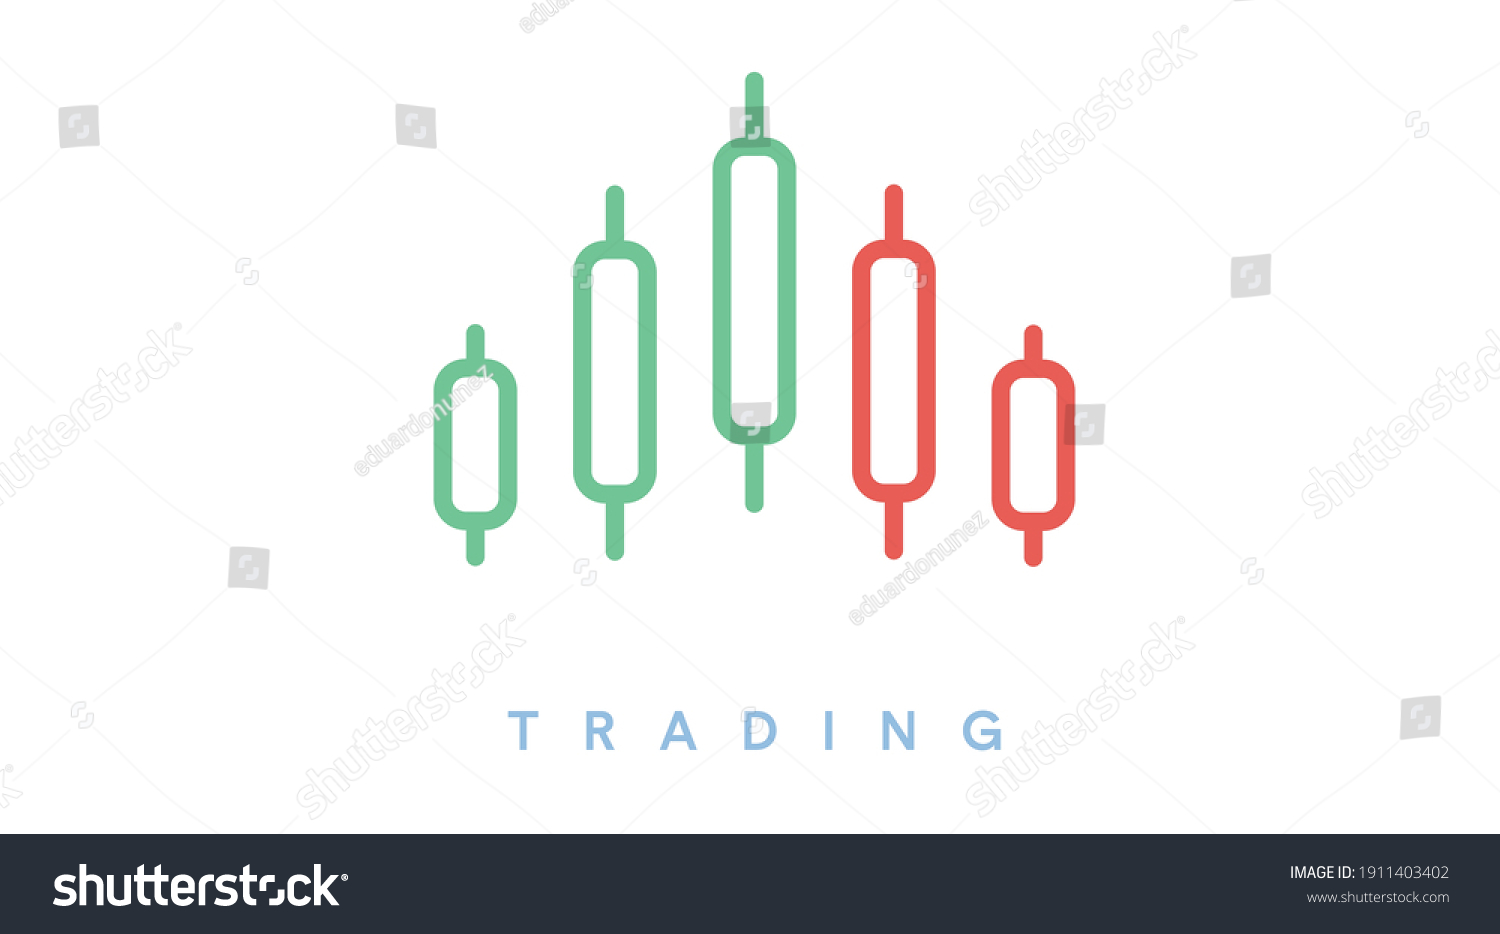 SVG of Vector Isolated Trading Icon or Illustration, with Candles or Candlesticks svg